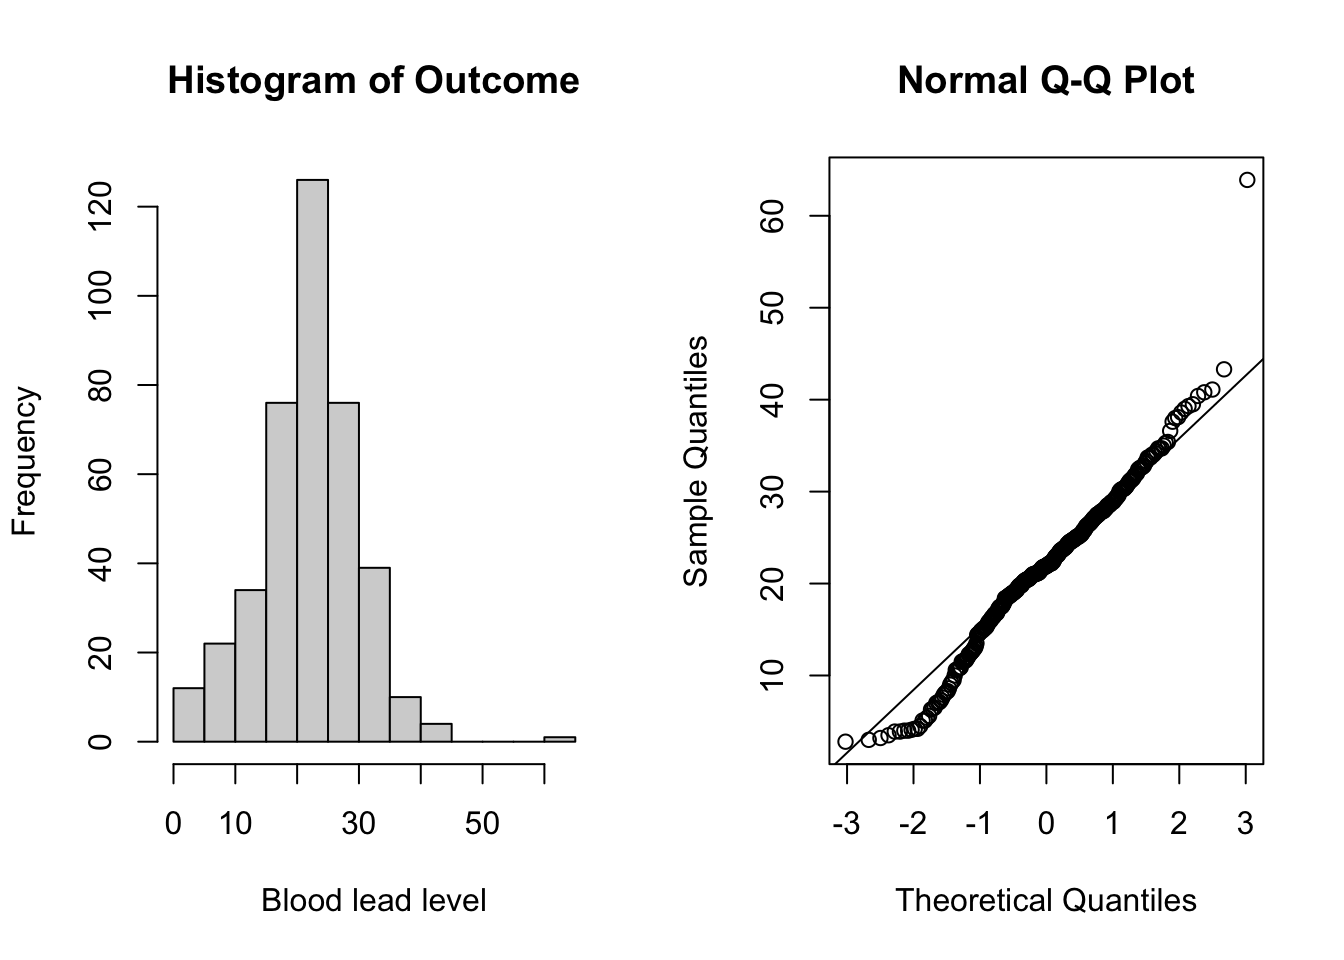 Plots for assessing normality of the outcome (blood lead level).